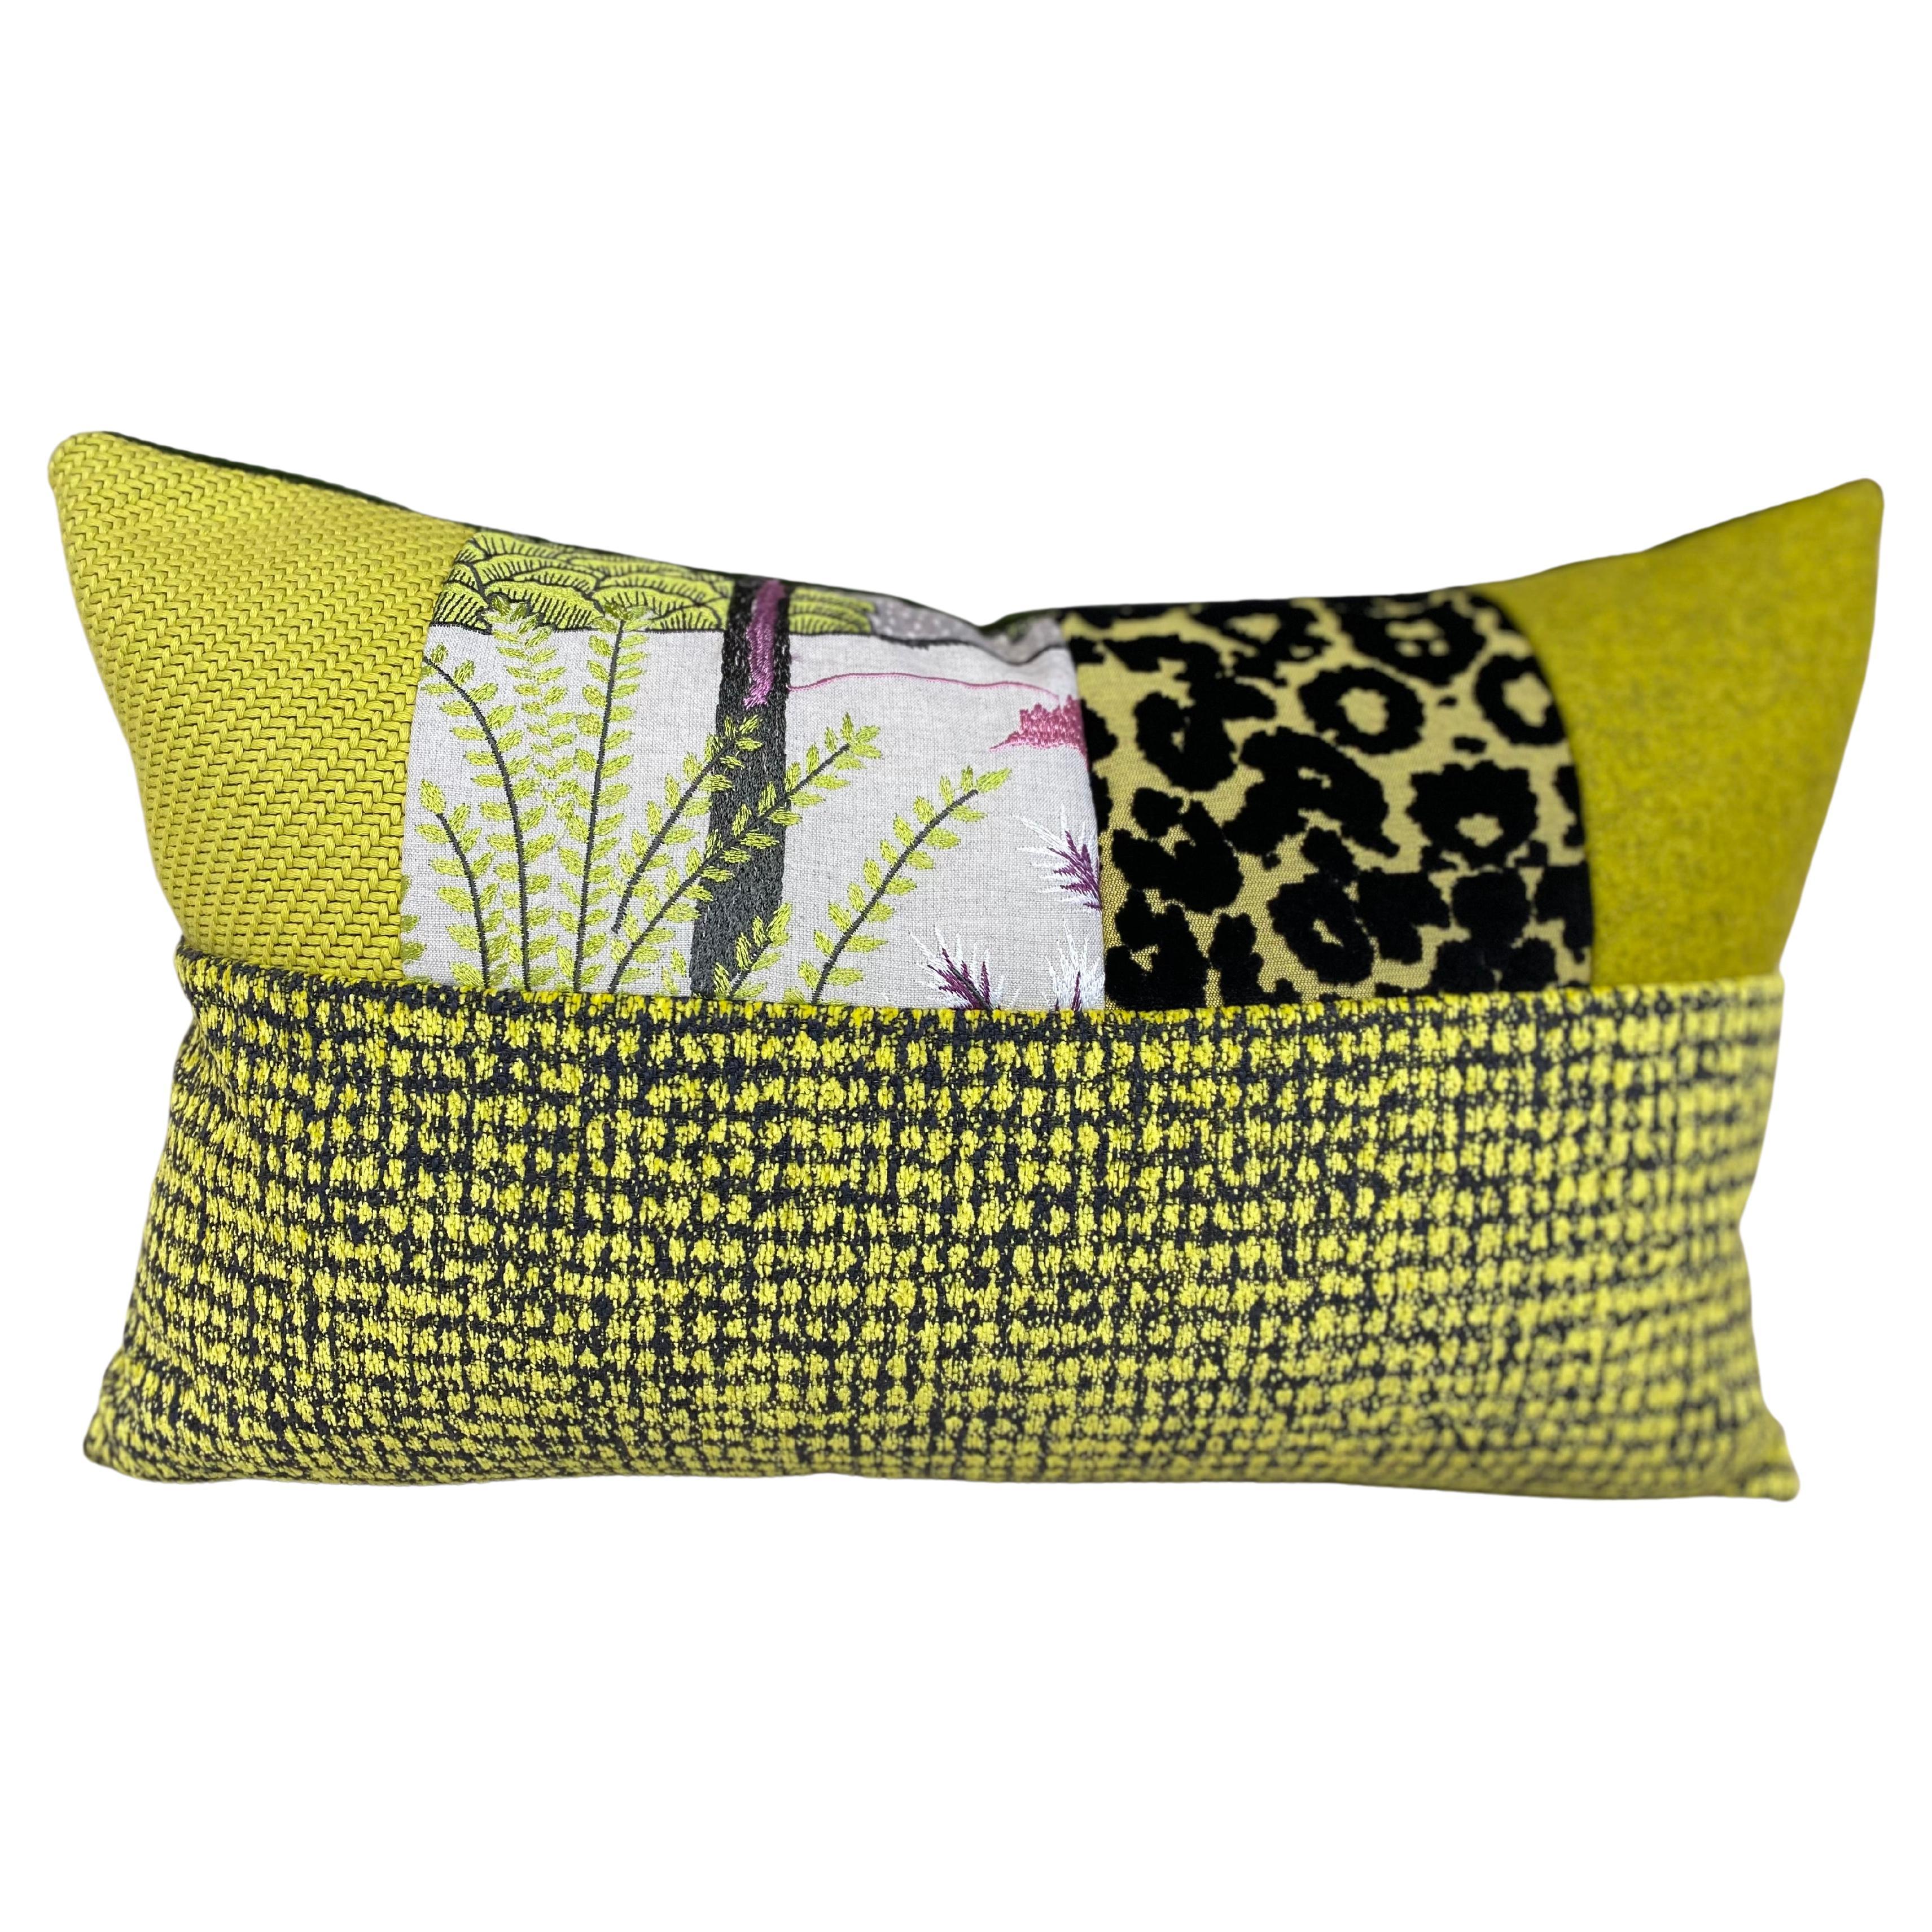 Lime Green Accent Lumbar Pillow with Black and White and Pink Accent Panels